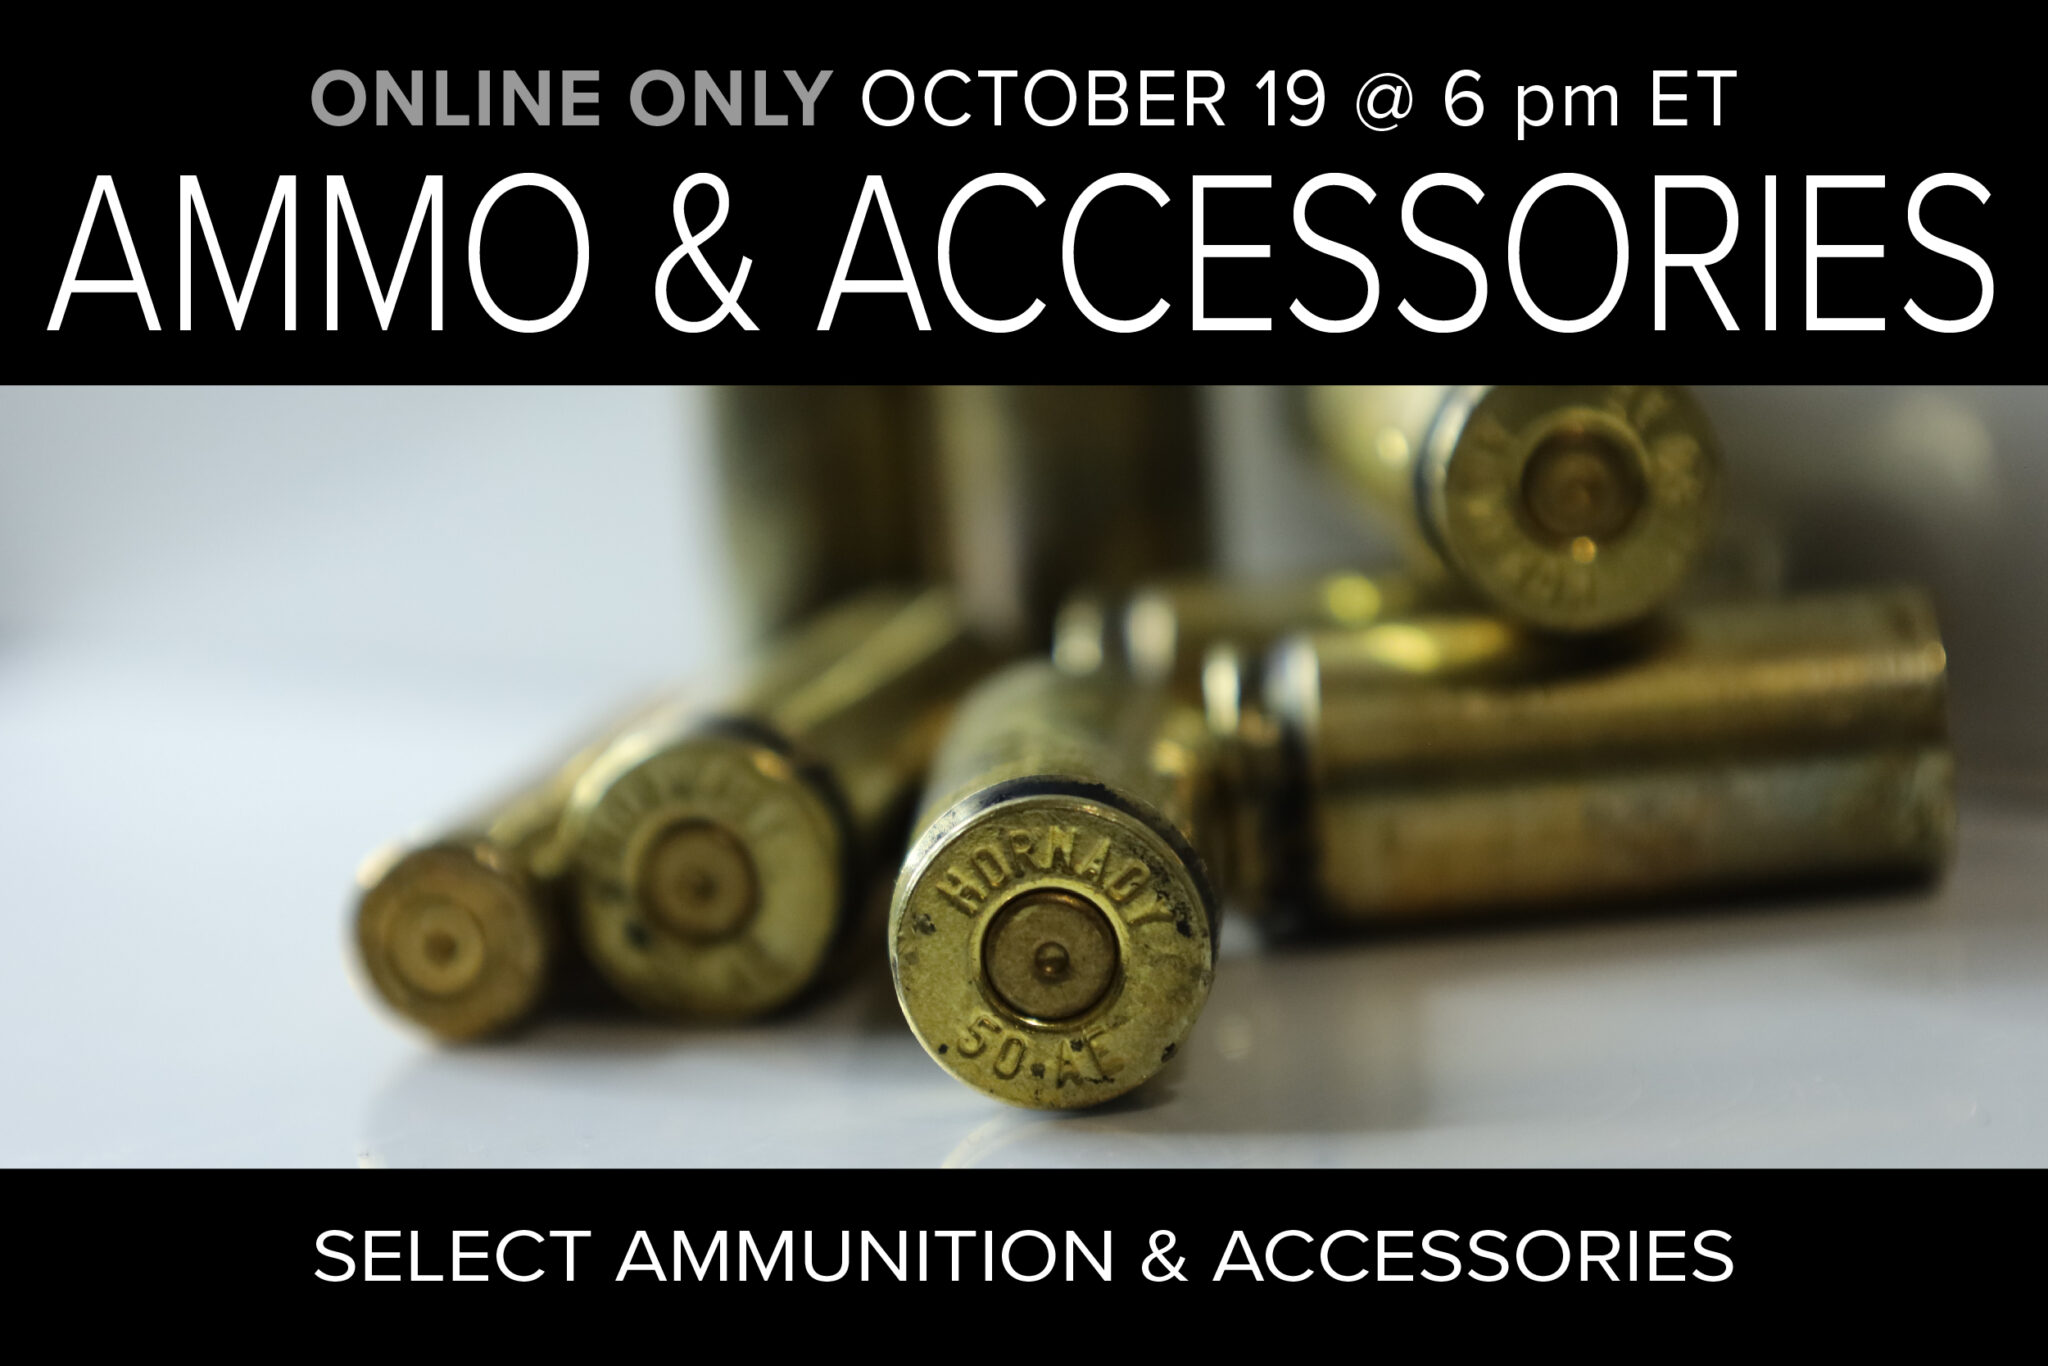 Ammo & Accessories auction October 19